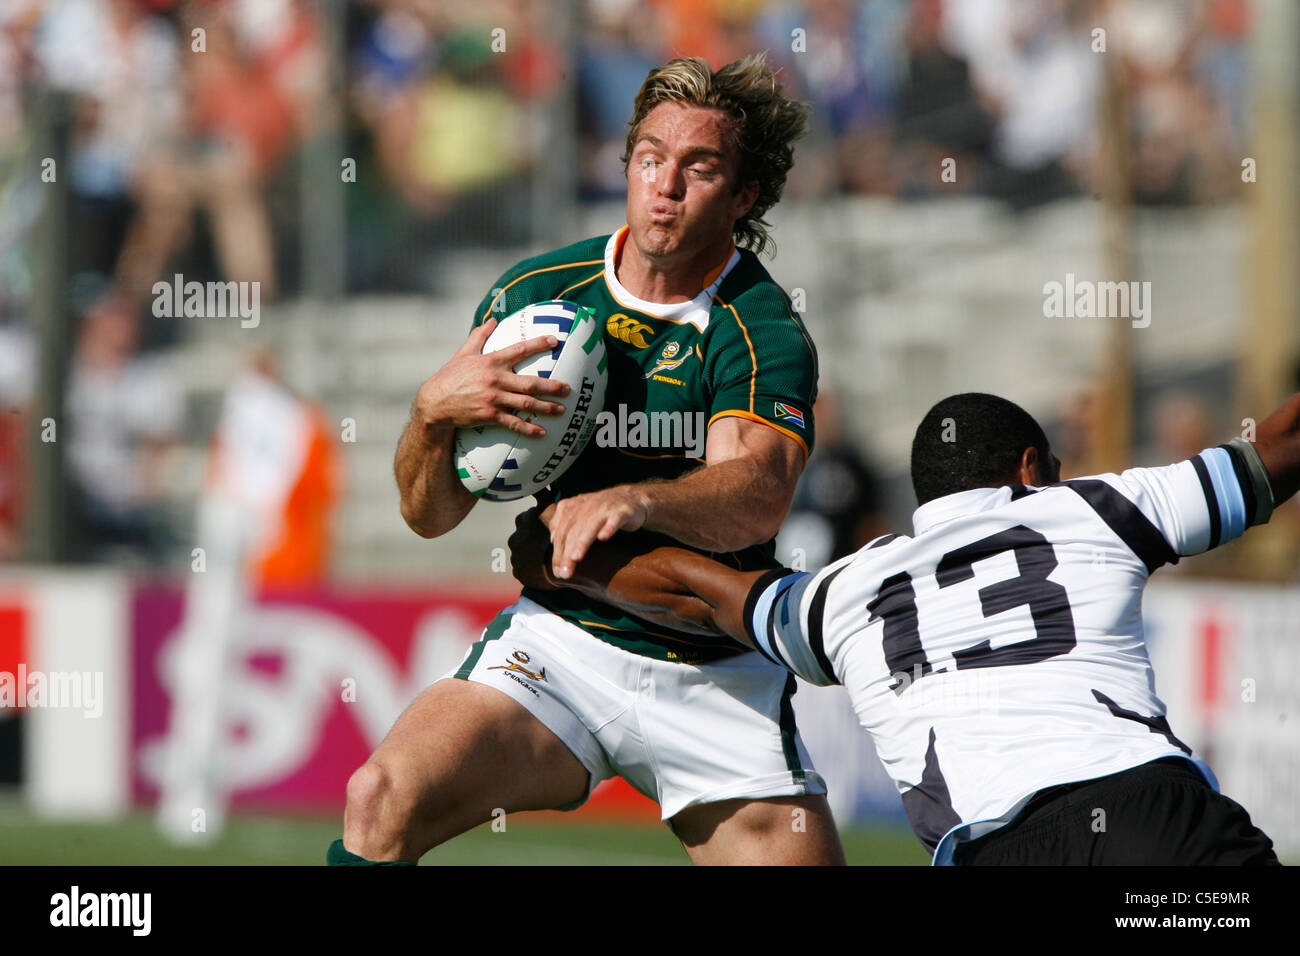 Percy MONTGOMERY Rugby World Cup 07 SOUTH AFRICA v FIJI Marseille 07.10.07 Stock Photo